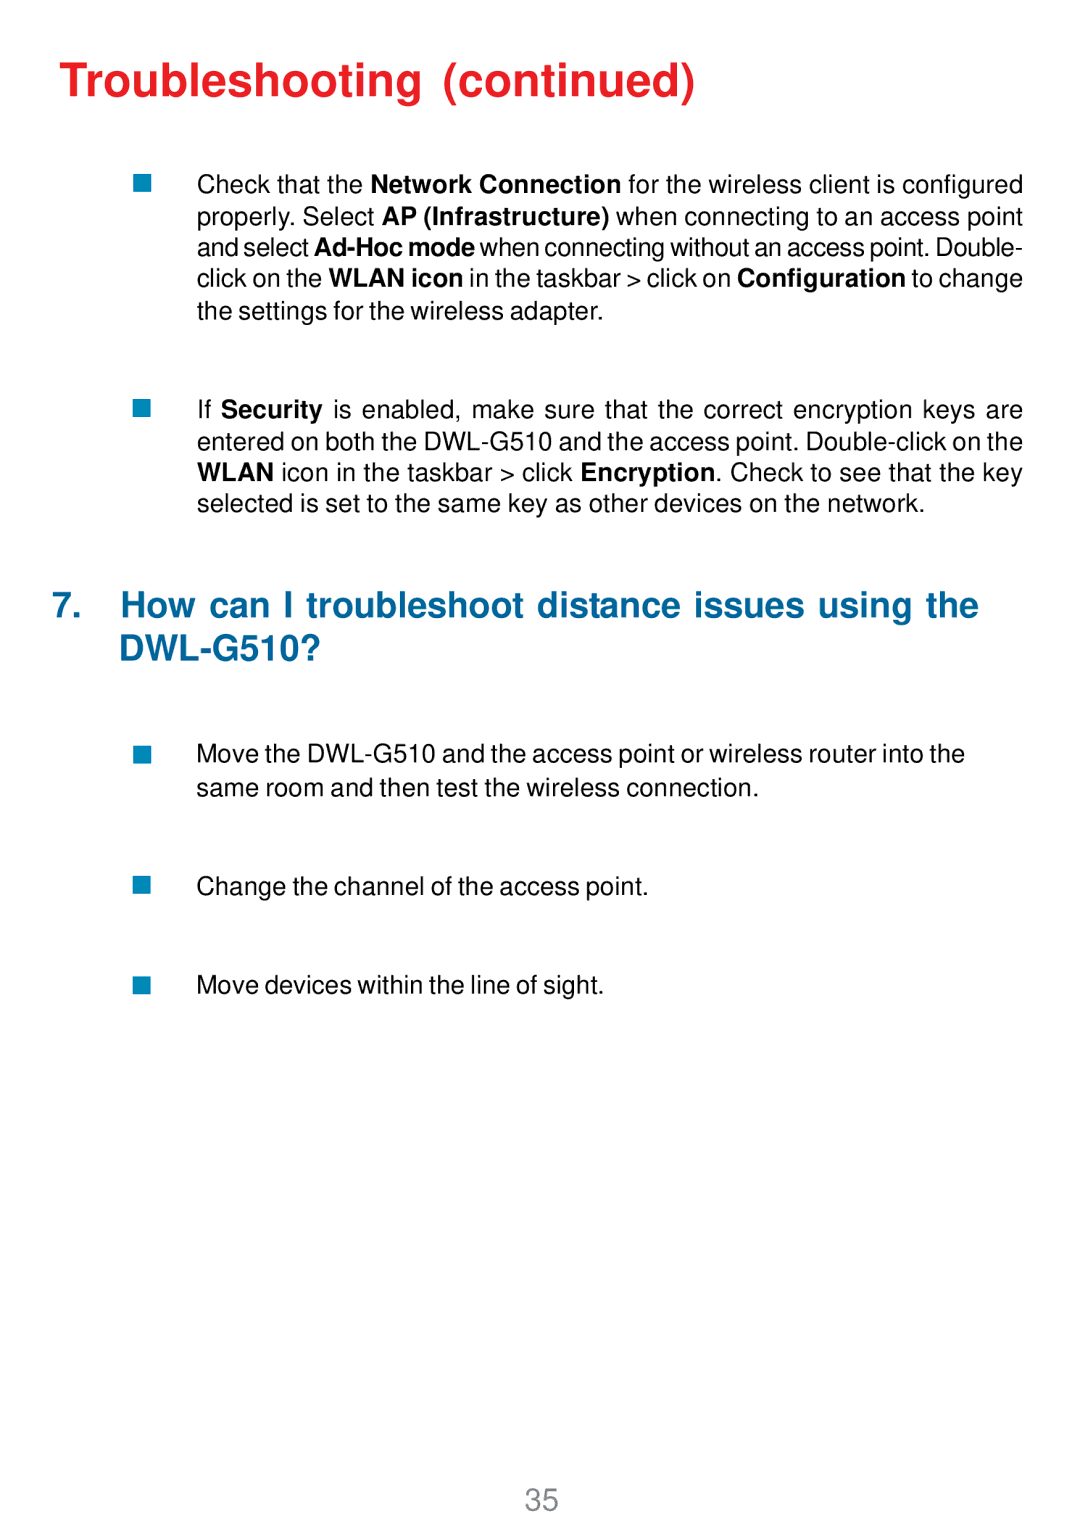 D-Link manual How can I troubleshoot distance issues using the DWL-G510? 